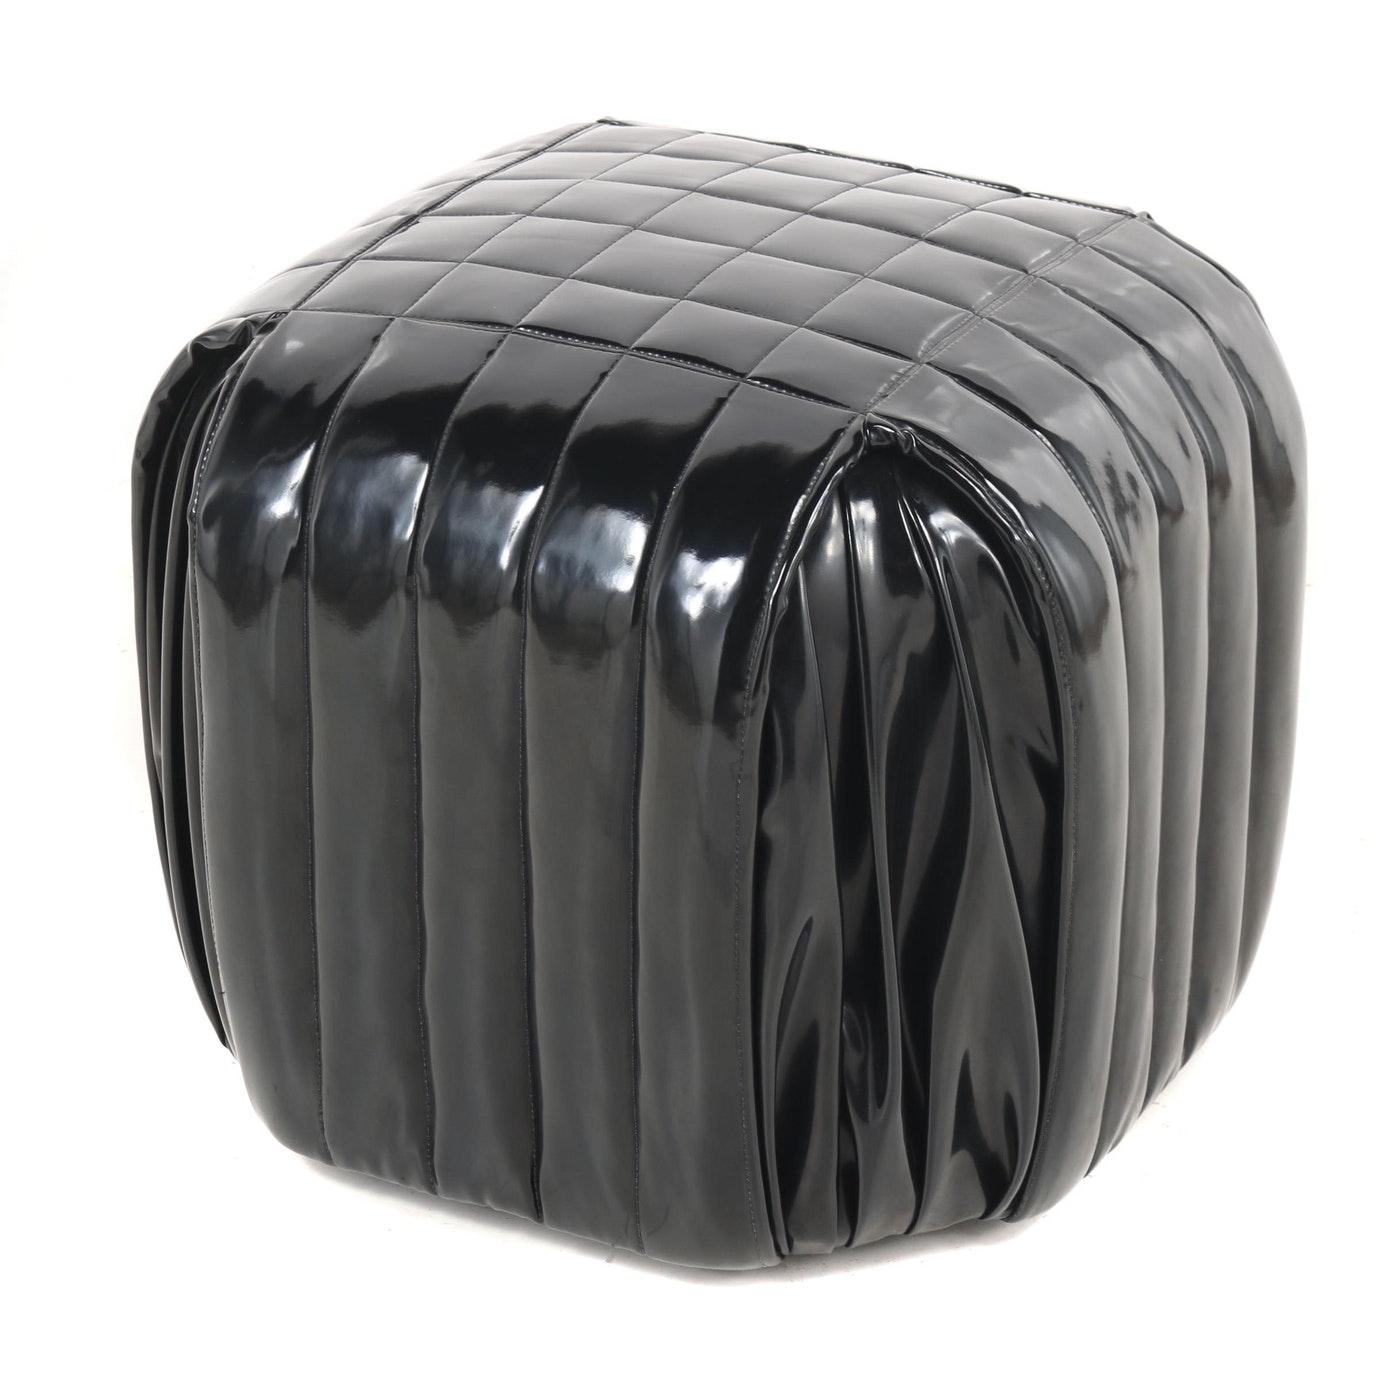 The Minimalist Italian design. Wrapped in black patent leather stools or poufs on wood feet. Quilted with a modern square stitch. The poufs are in very good condition with lovely patina. The perfect addition to any space.